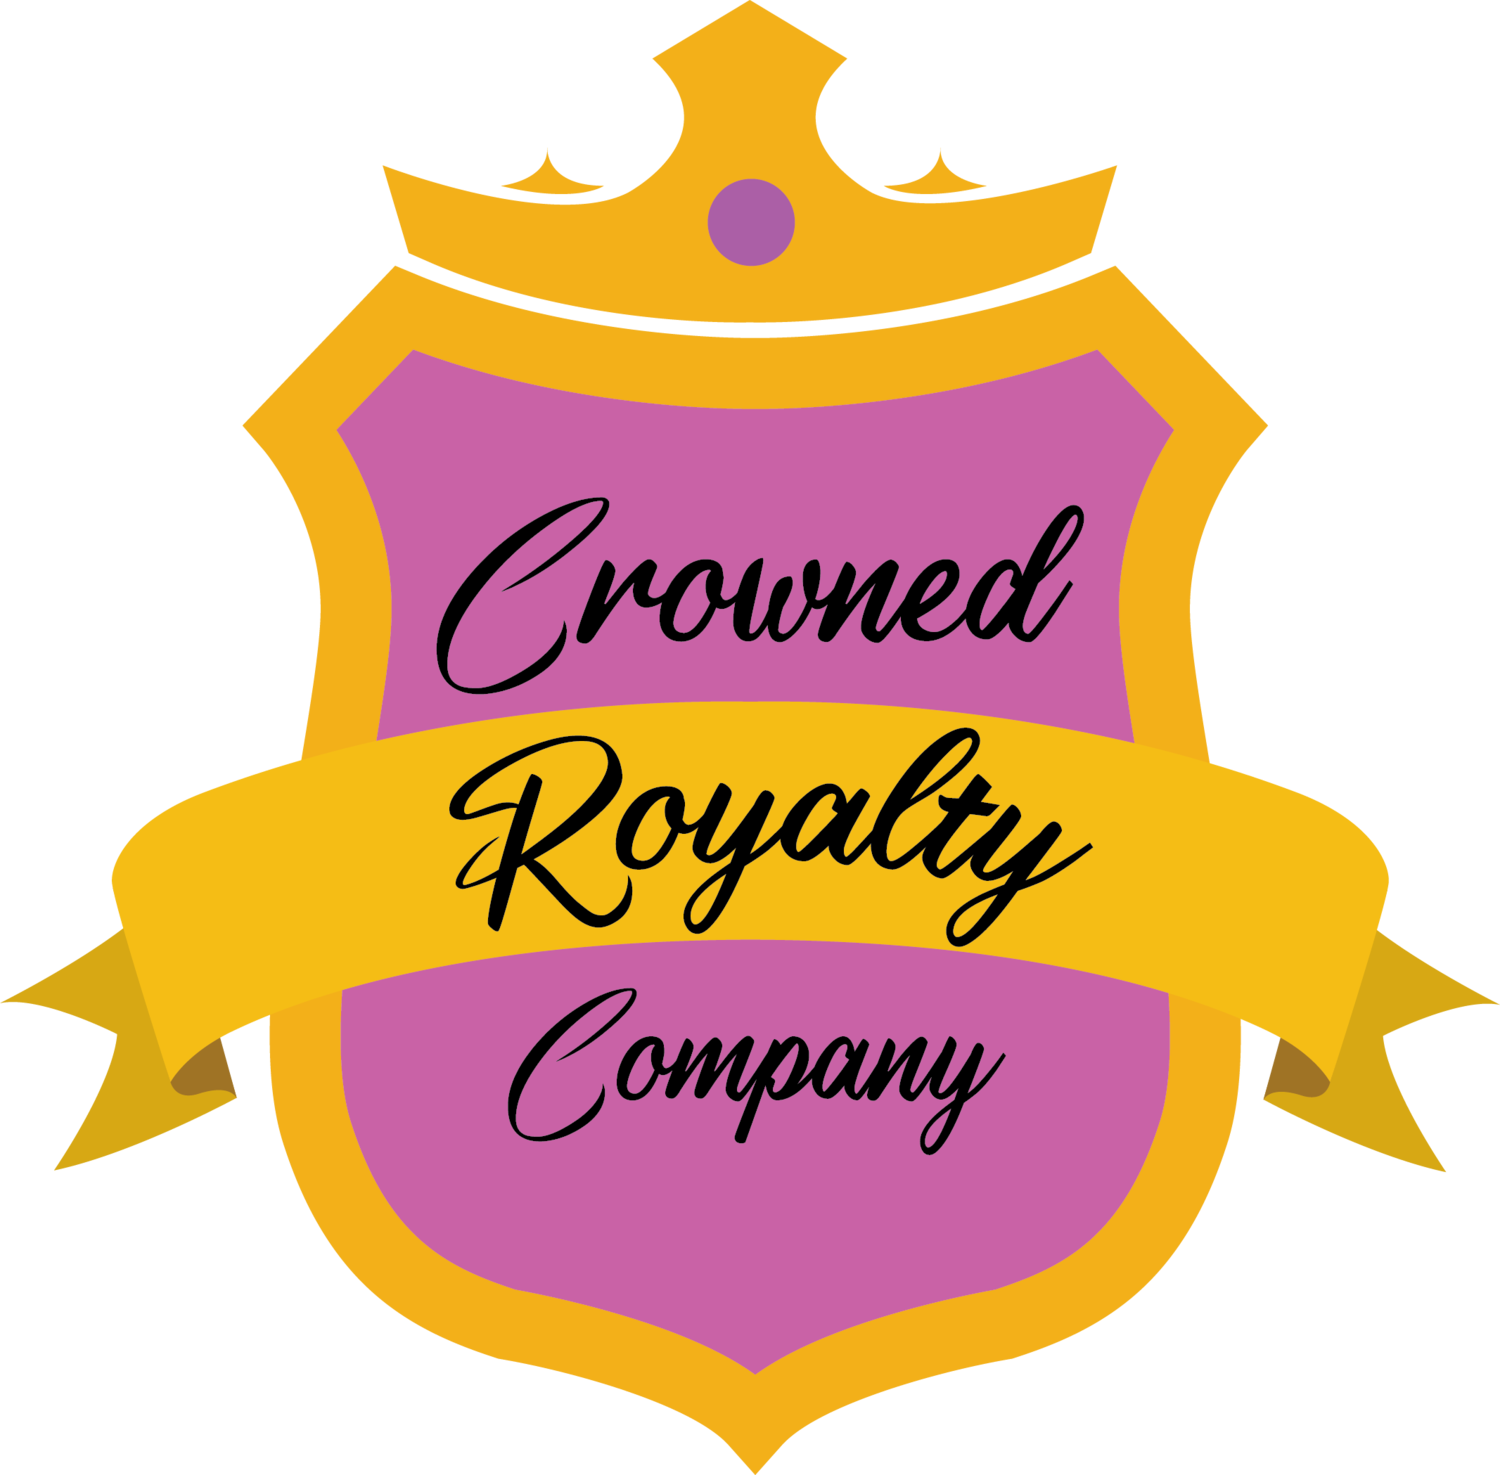 Crowned Royalty Company